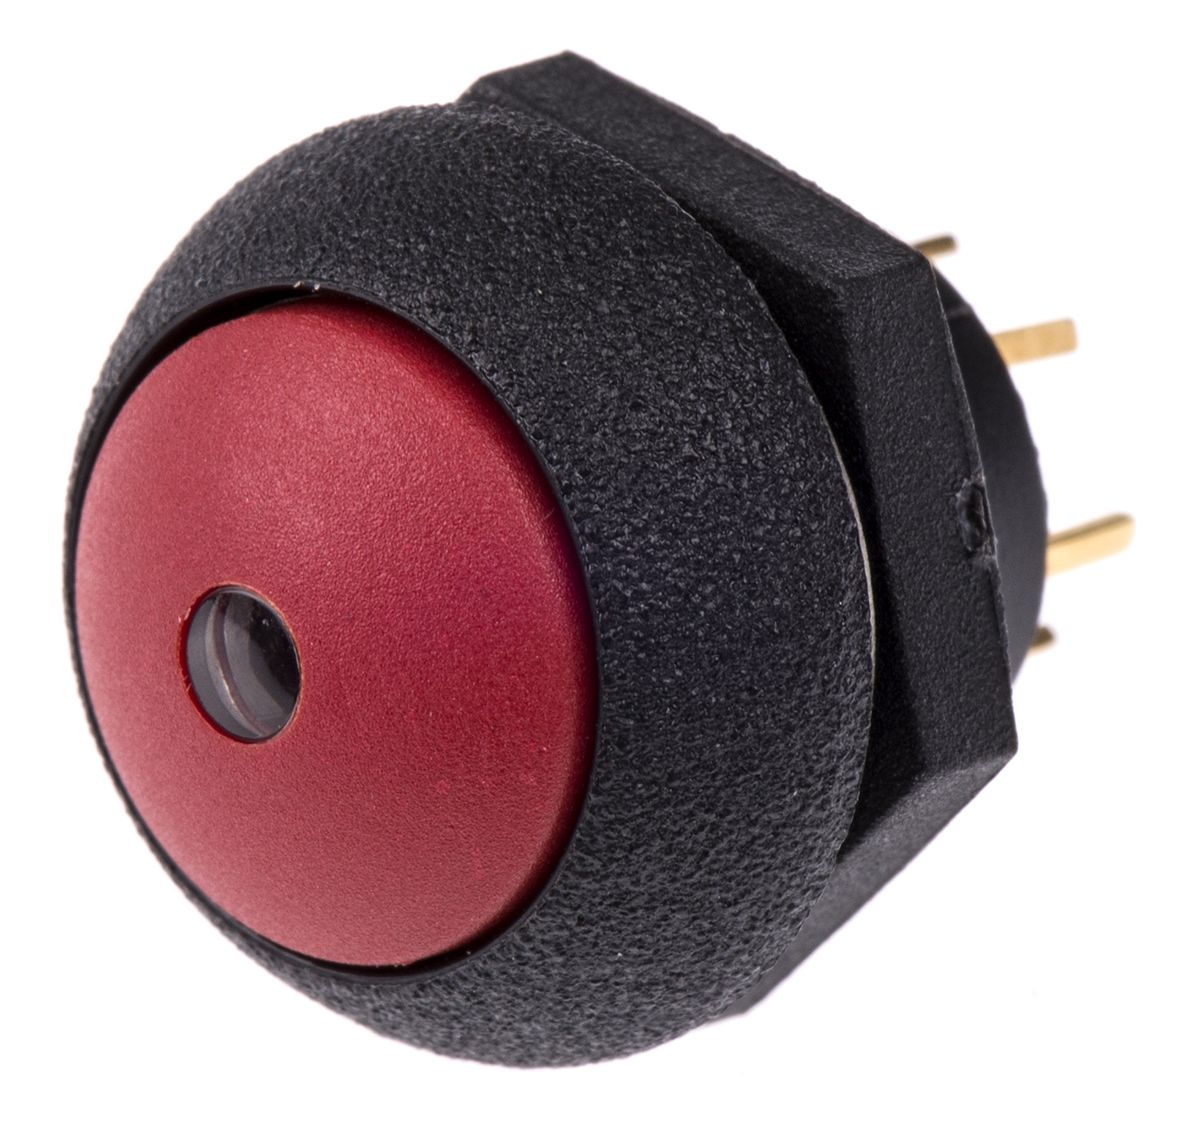 Otto Illuminated Momentary Push Button Switch, Panel Mount, SPDT, Red LED, 28V dc, IP68S